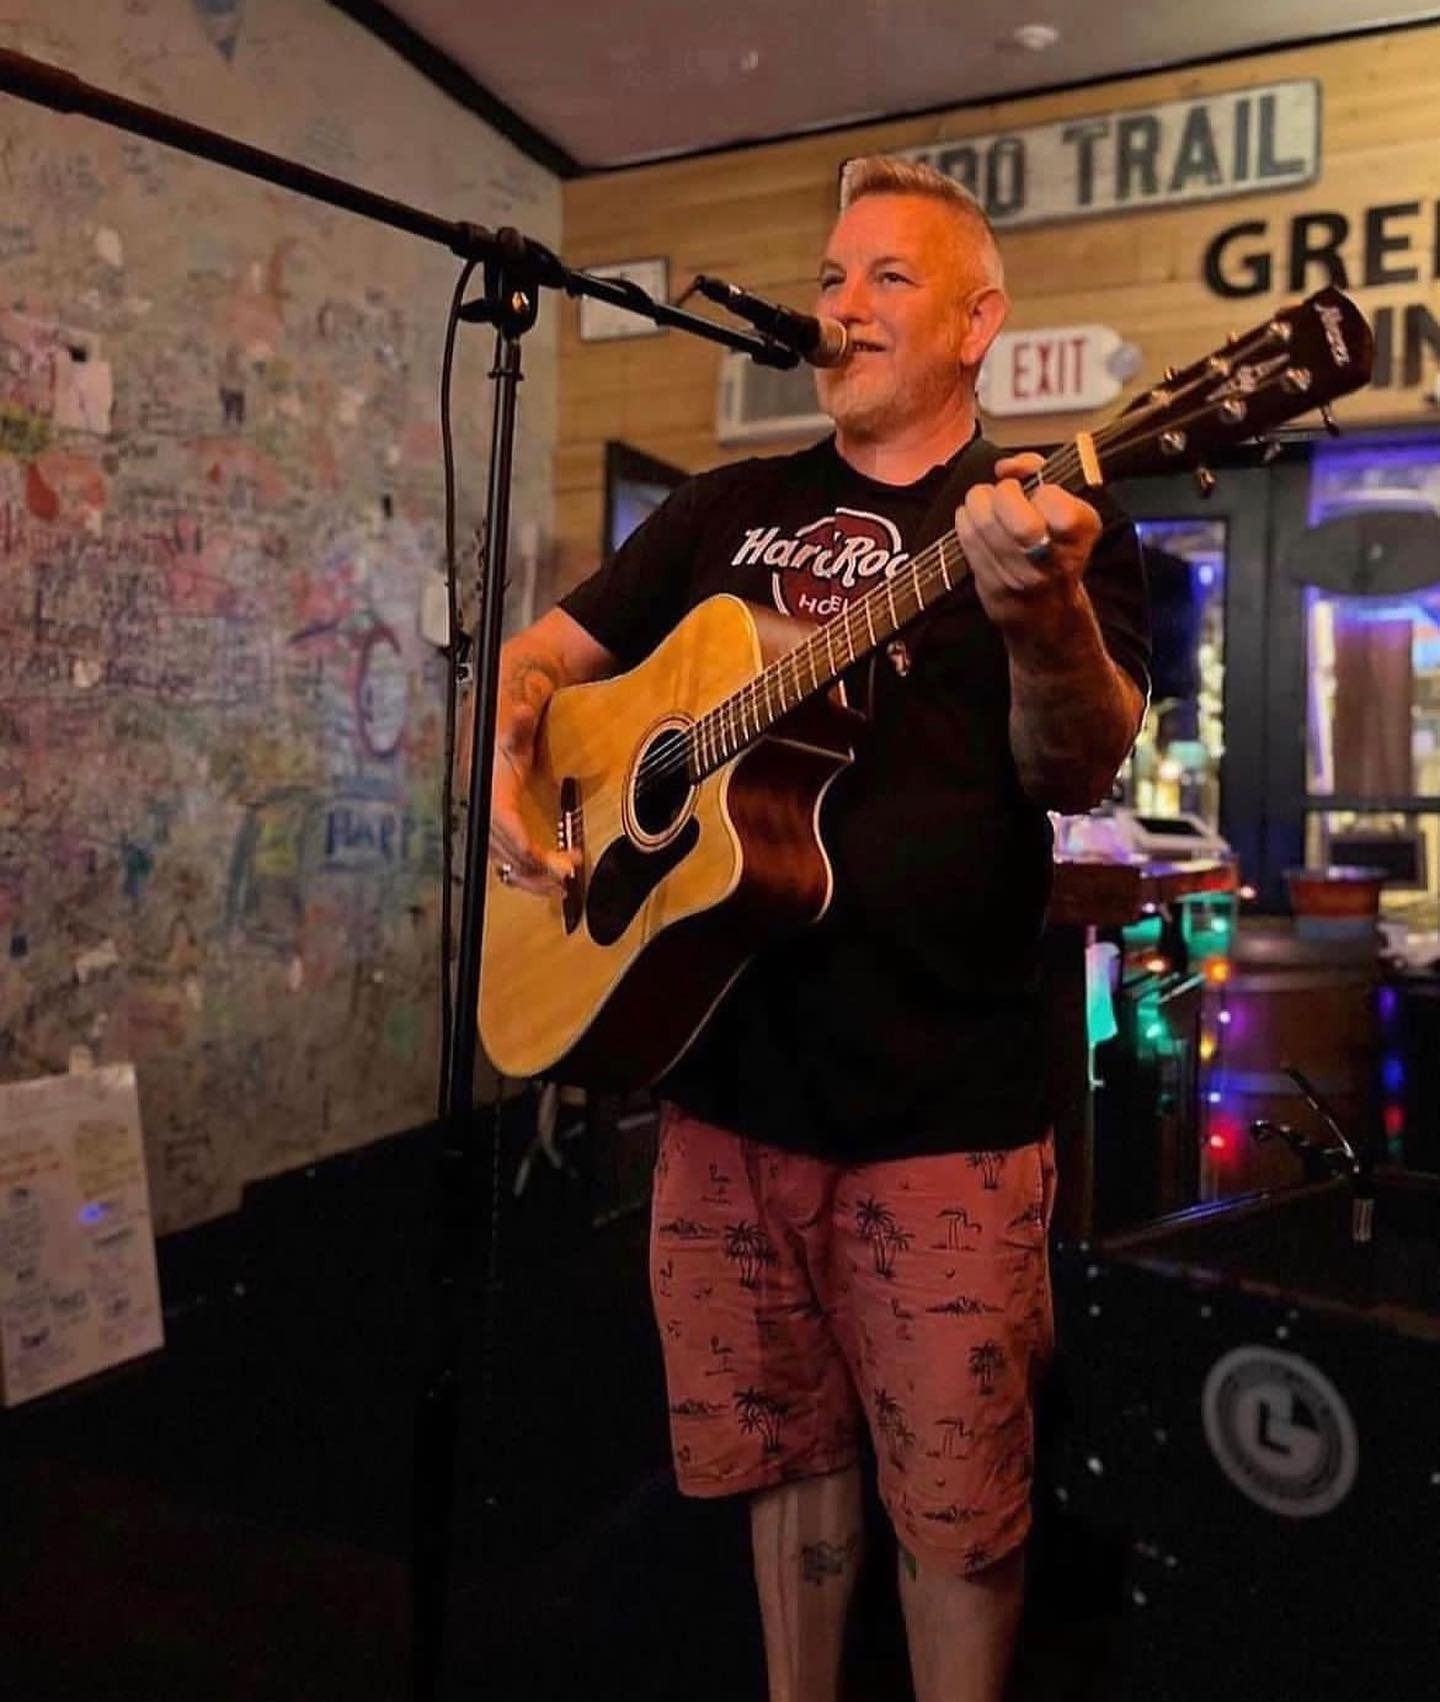 THIS WEEKEND:

Thursday: Mark Mathews 7-10 PM🏖️
Friday: Andrew Katter 8-11 PM🌄
Saturday: Tom Appleton 8-11 PM🎸

See y&rsquo;all then!🍻✨ #GREENLINEBREWERY